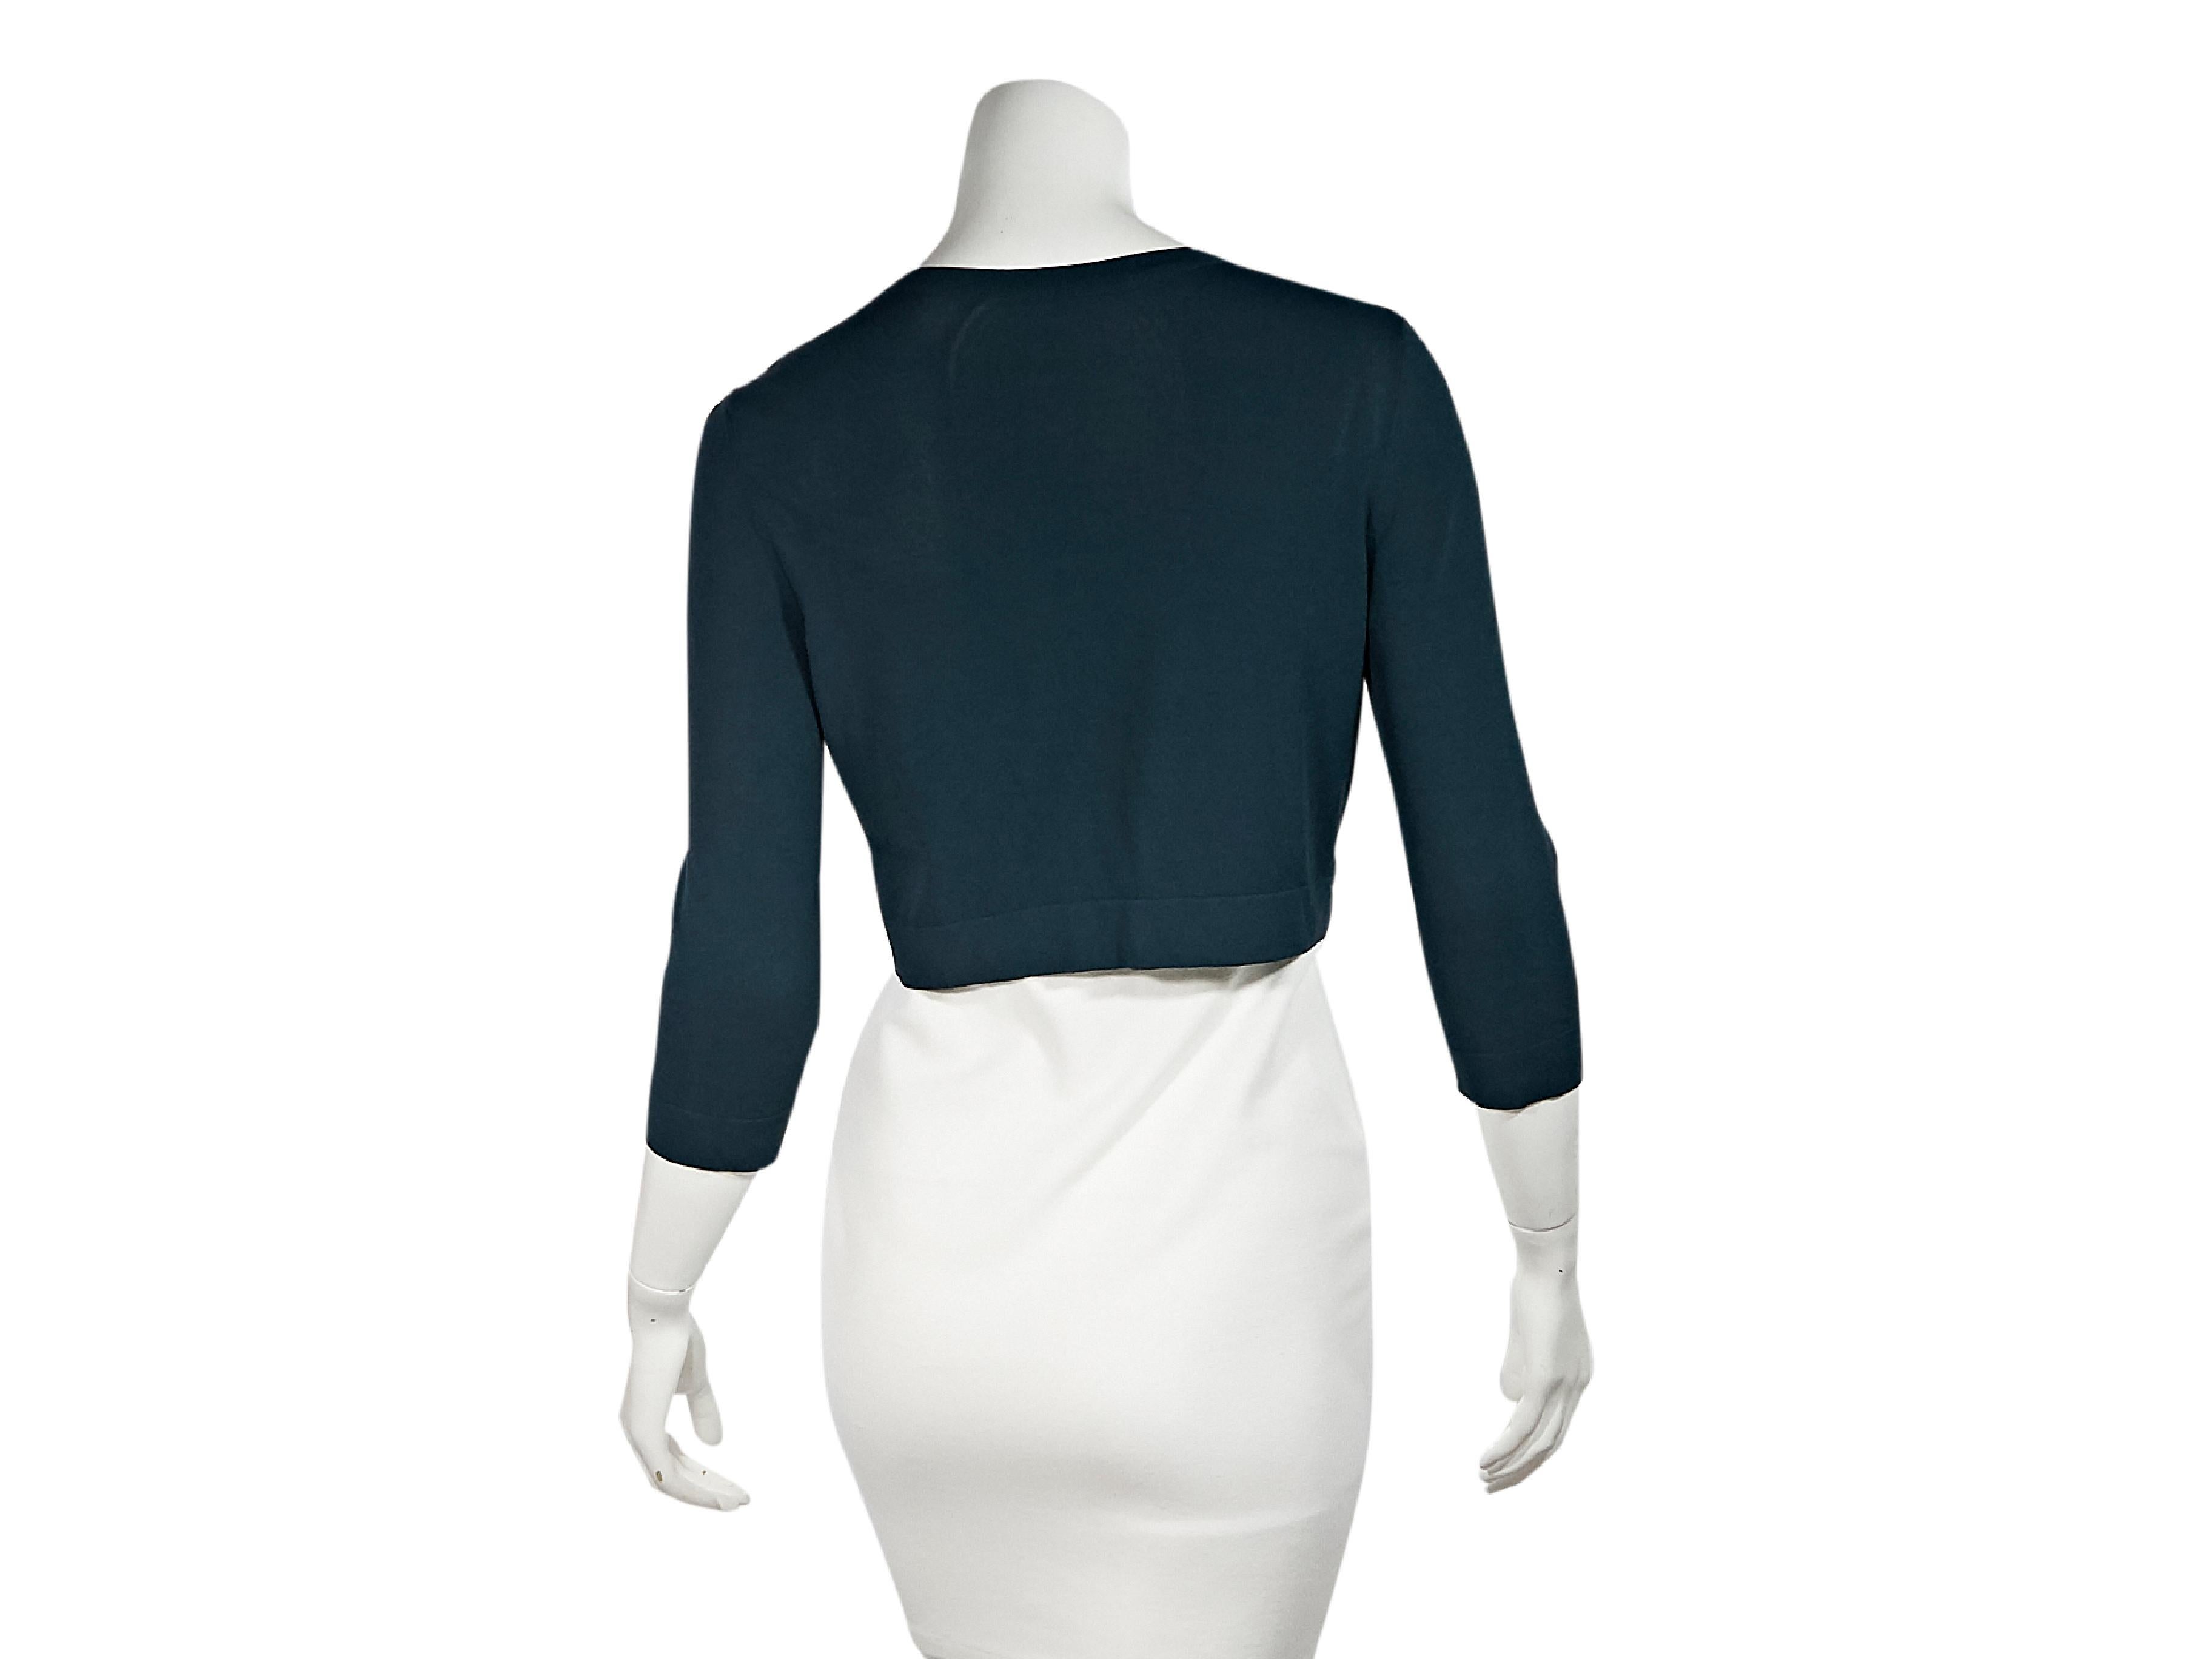 Product details:  Teal blue cropped cardigan by Alaia.  Jewelneck.  Three-quarter length sleeves.  Banded cuffs and hem.  Button-front closure.  34